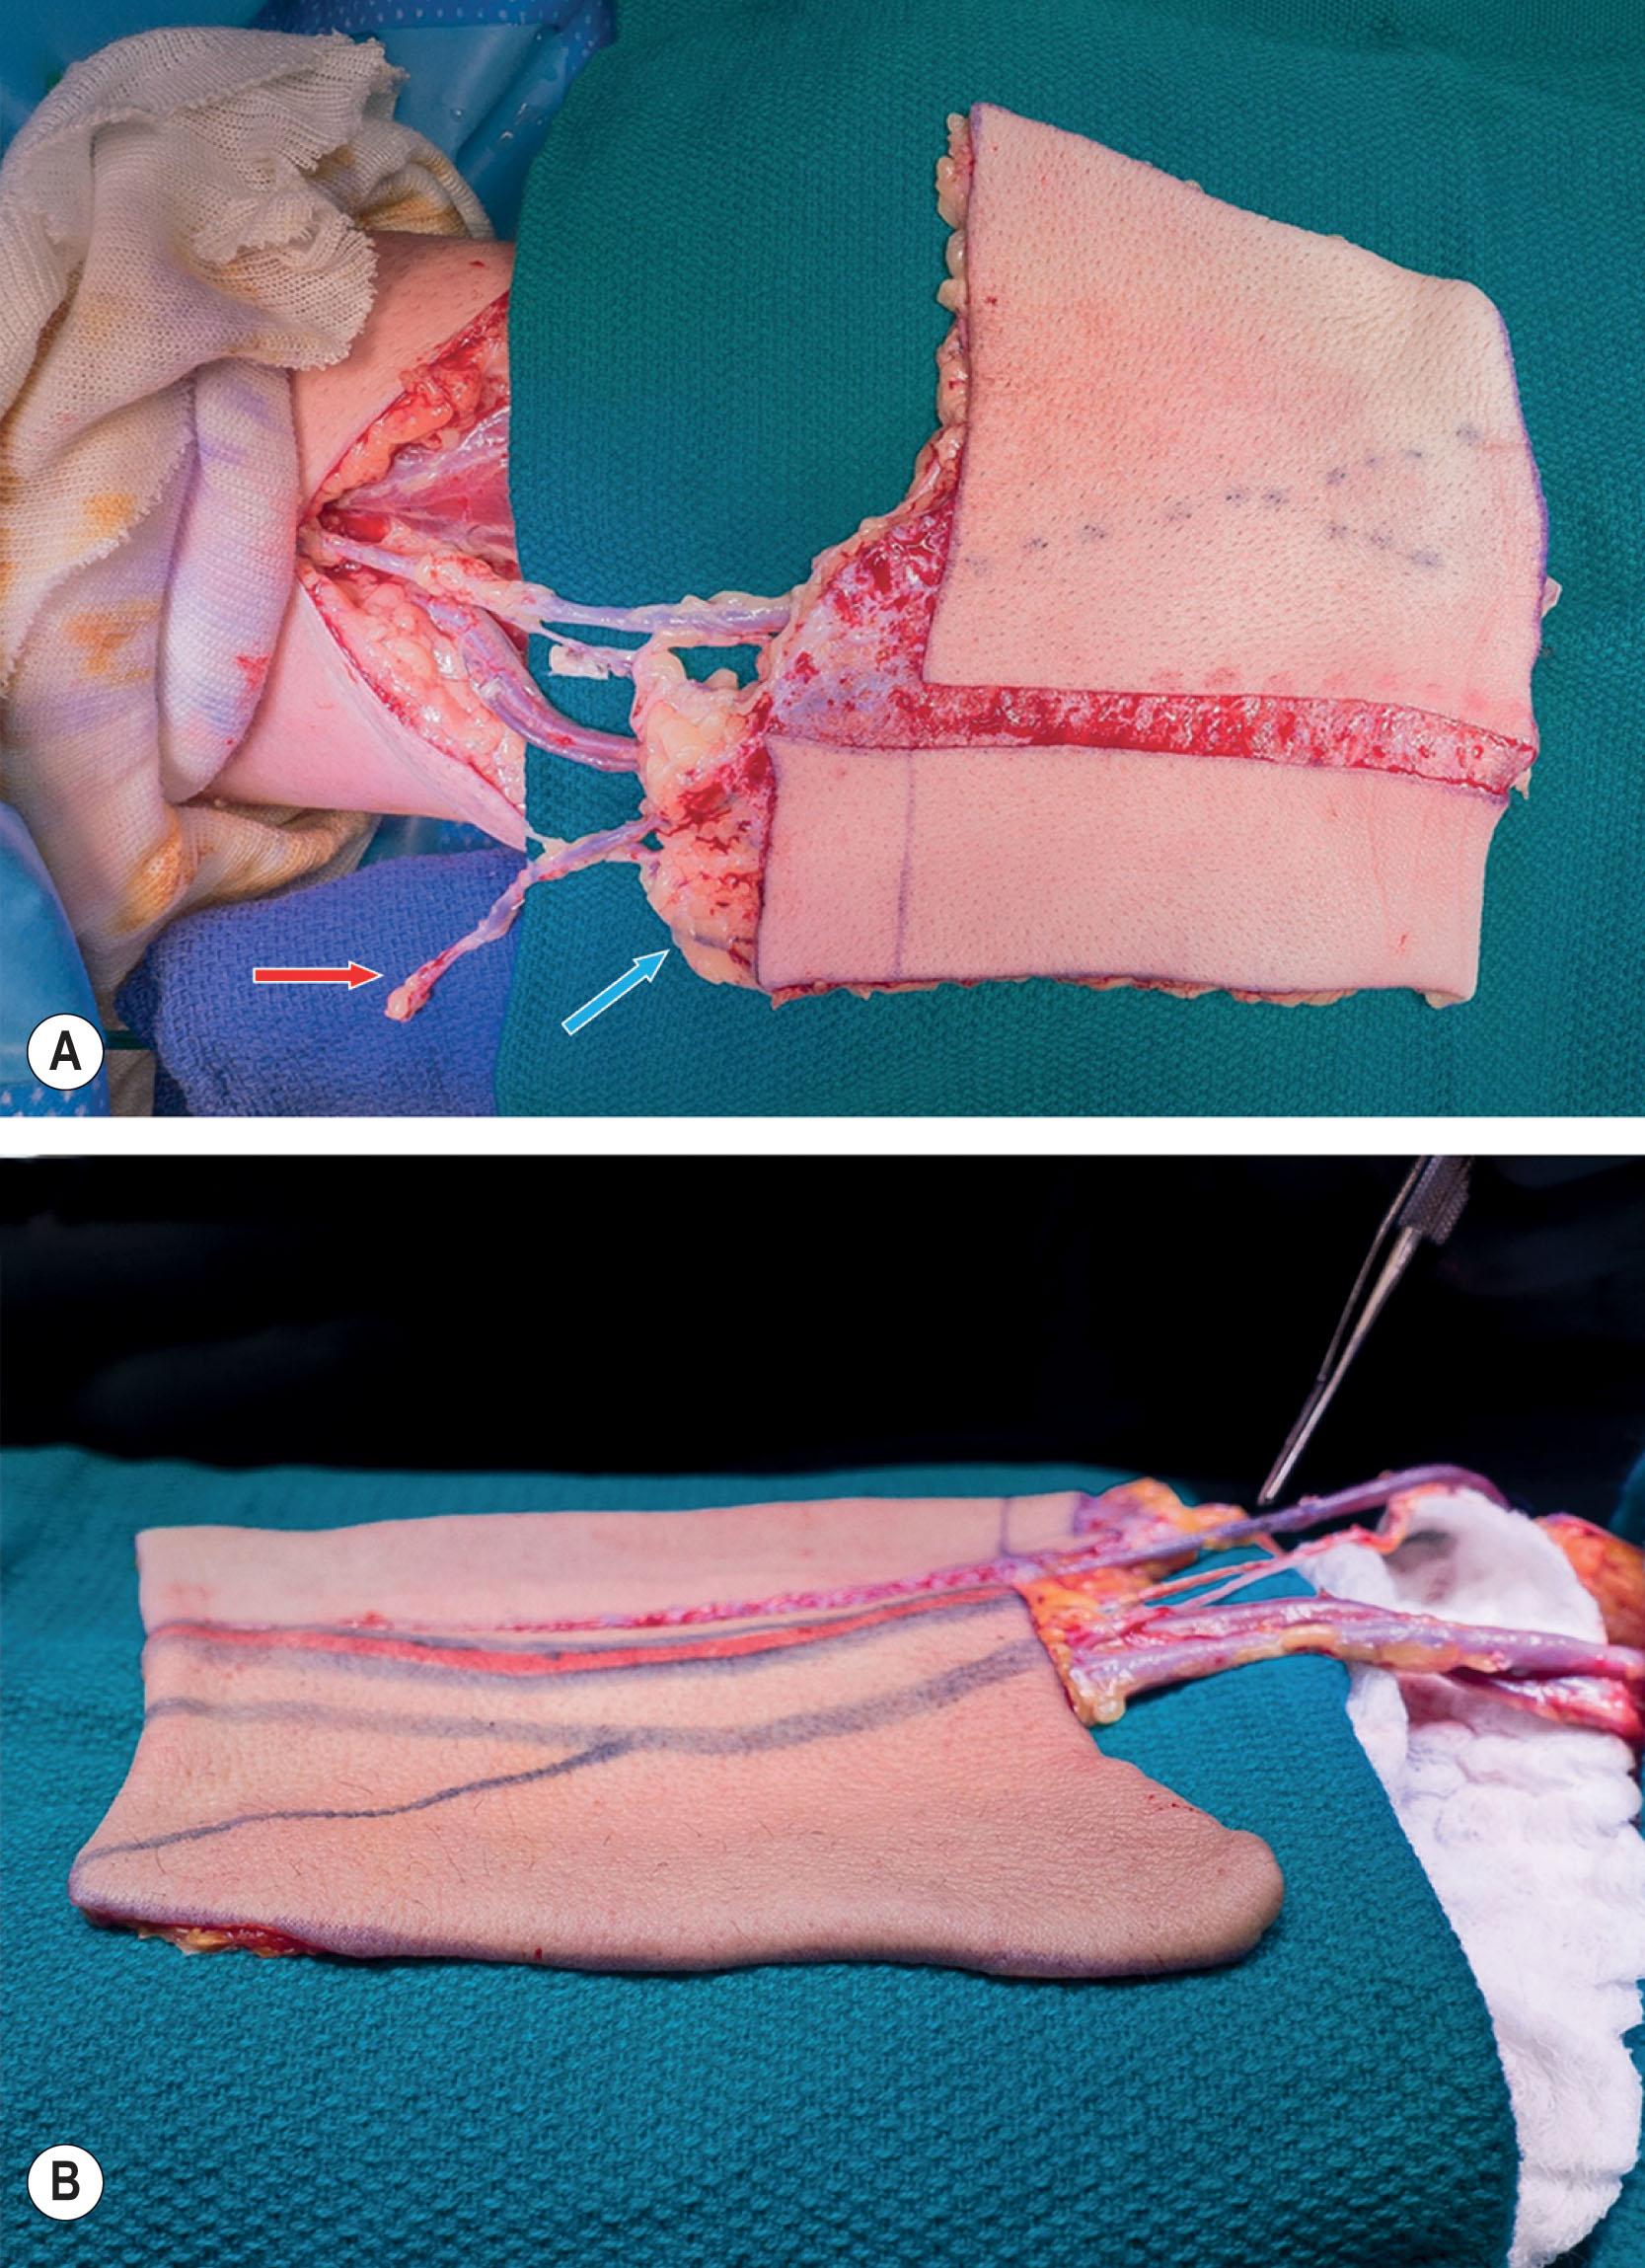 Figure 14.3.7, Radial forearm phalloplasty after elevation. (A) Note inclusion of additional outflow vein corresponding to urethral component of flap (red arrow) in addition to additional perfused proximal adipofascial tissue to reinforce eventual urethral anastomosis (blue arrow). (B) The radial forearm phalloplasty most reliably yields a thin and pliable flap.